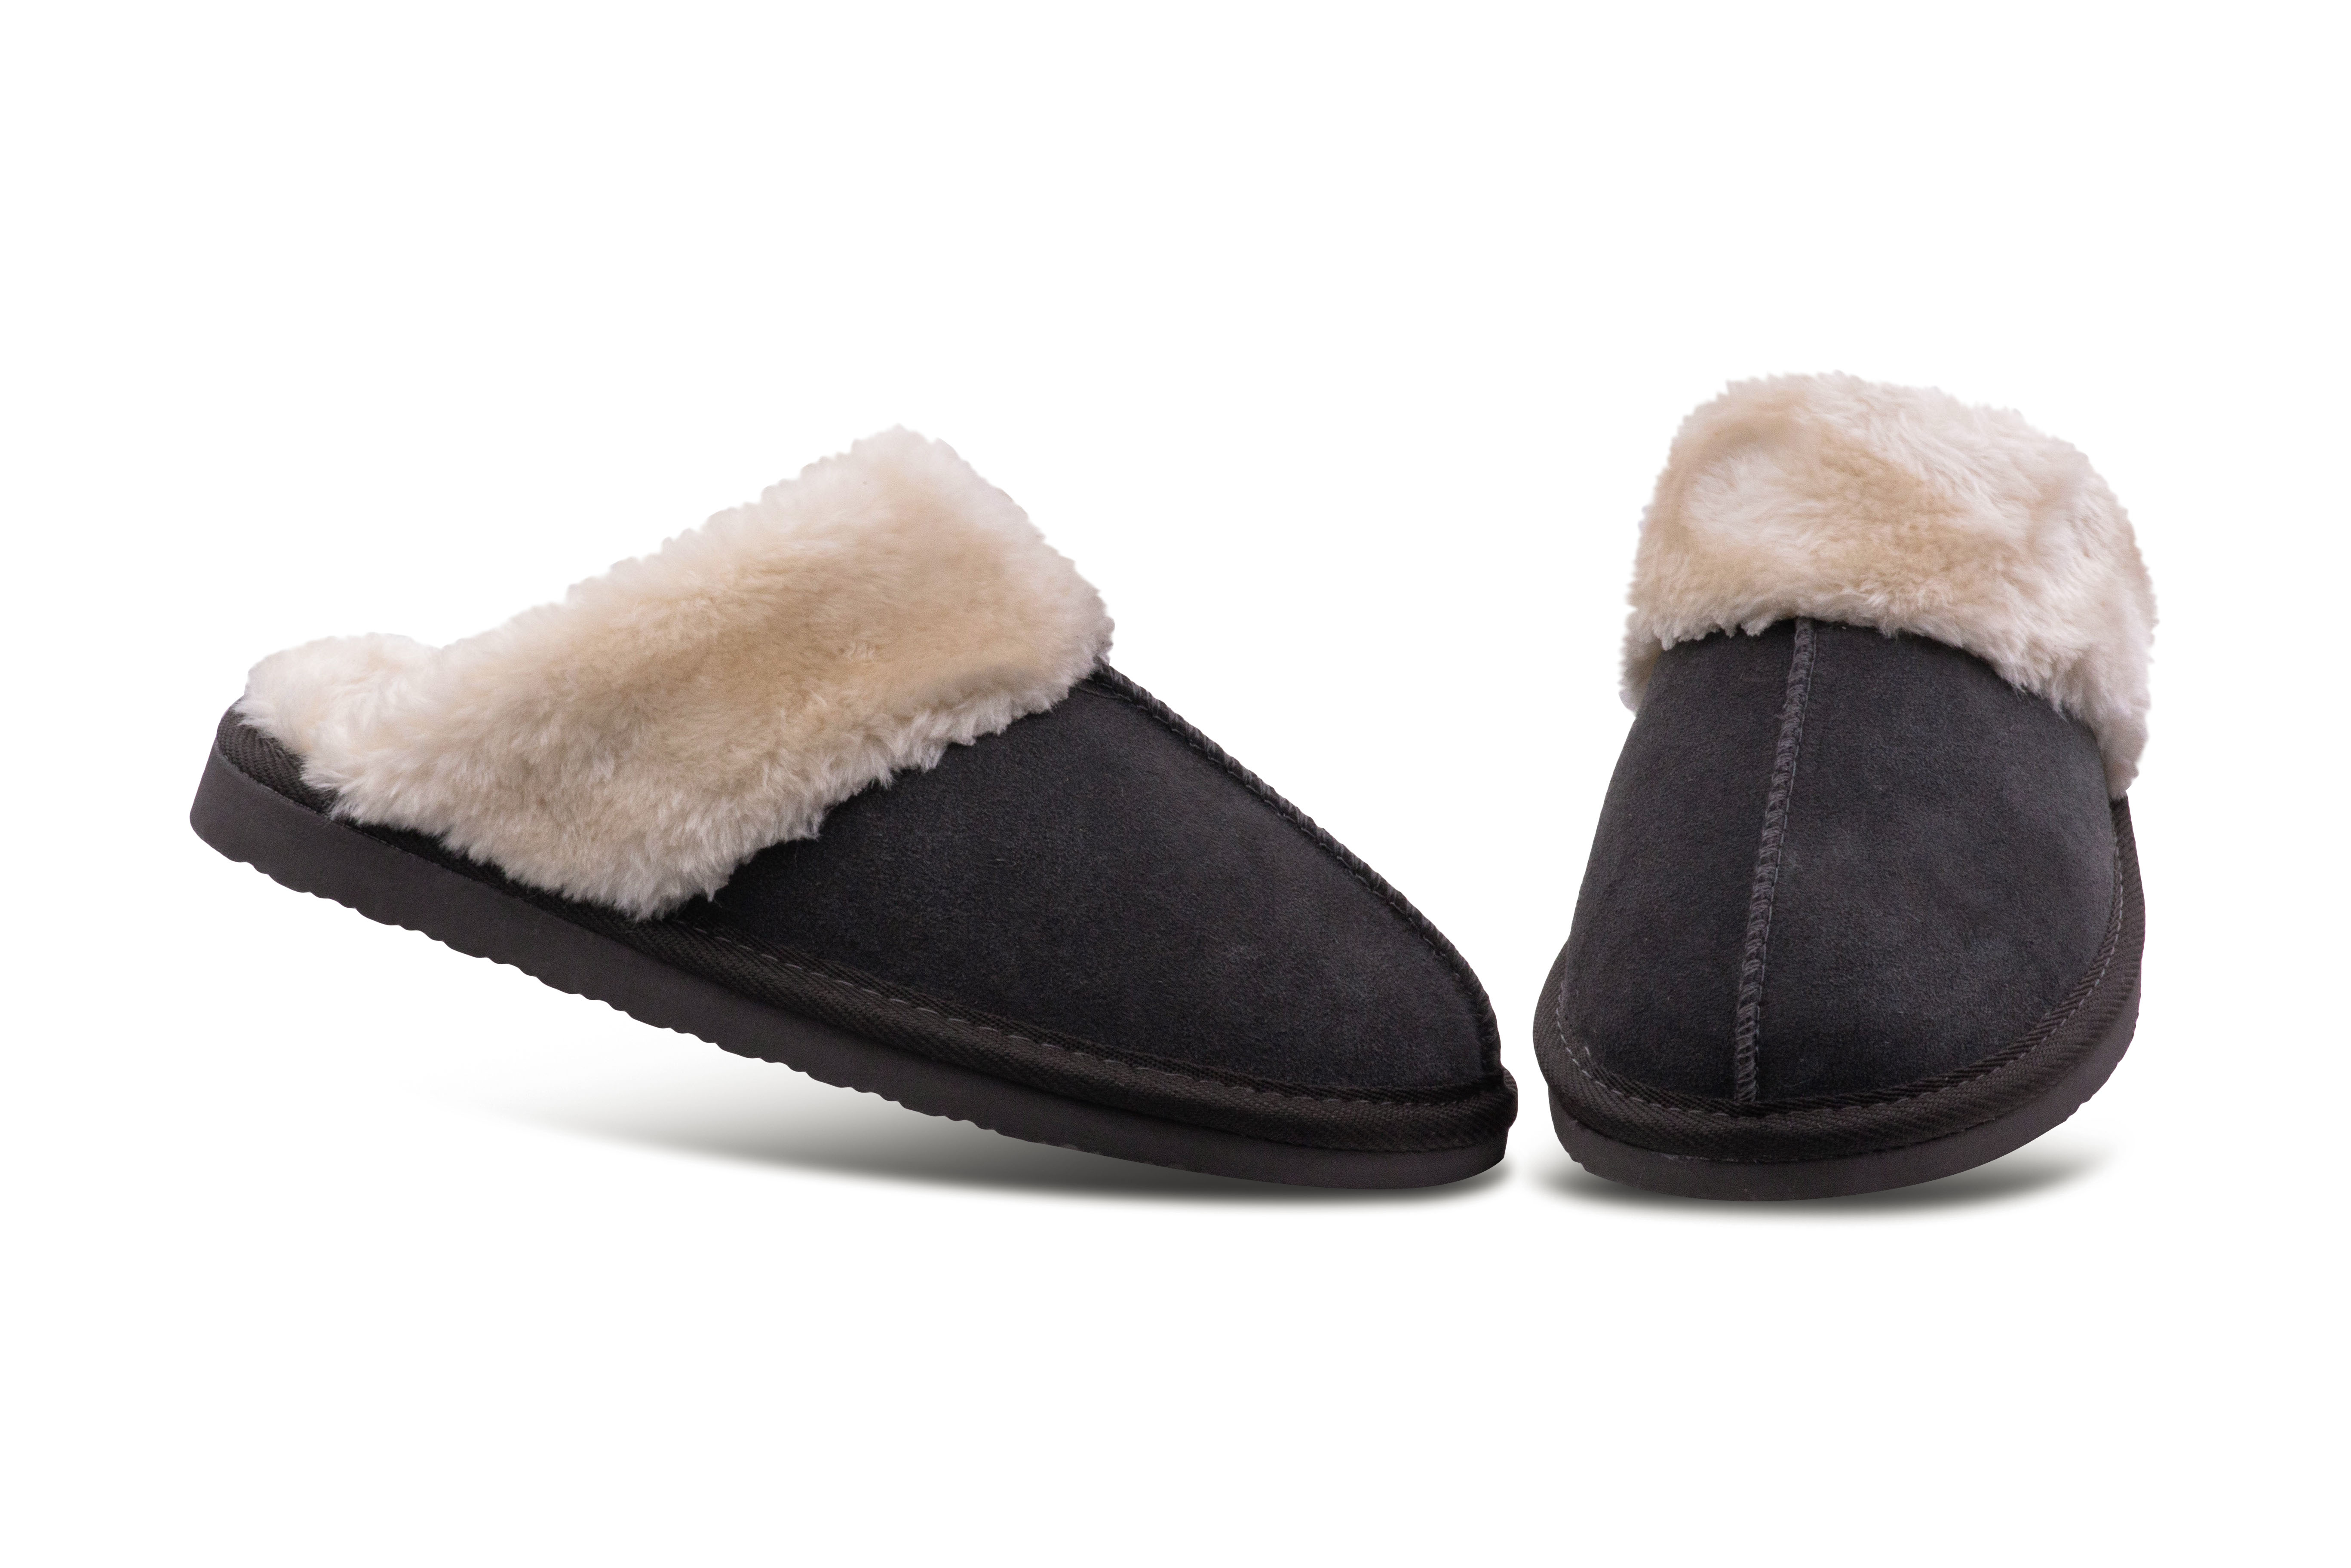 Minnetonka Womens Chesney Fur Lined Slippers - Charcoal - Size 7